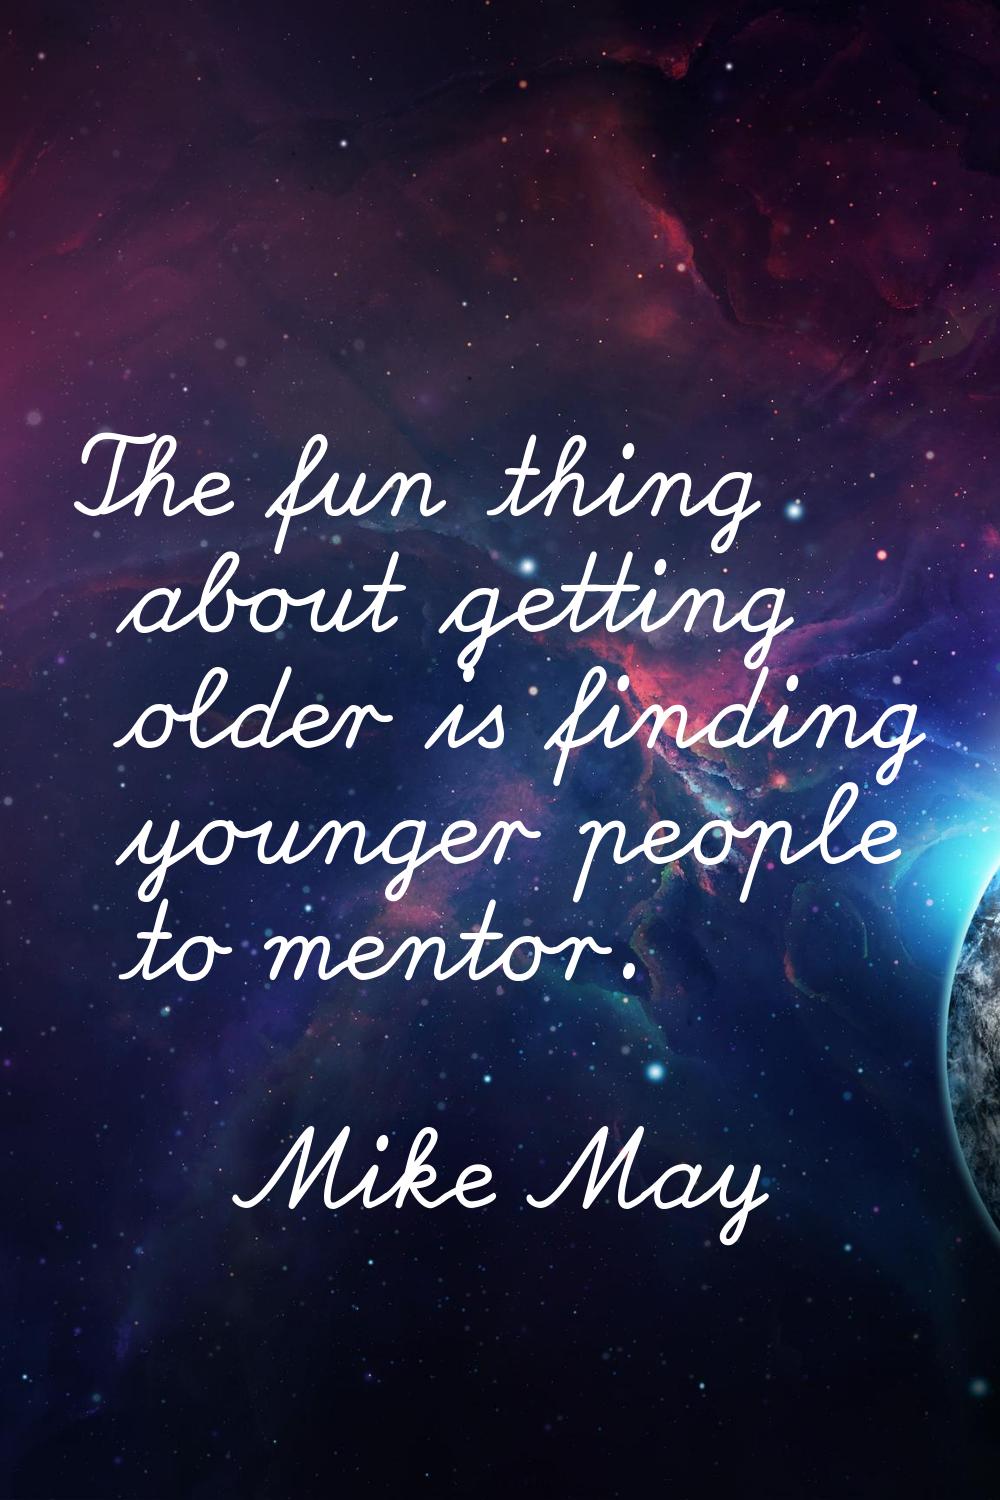 The fun thing about getting older is finding younger people to mentor.